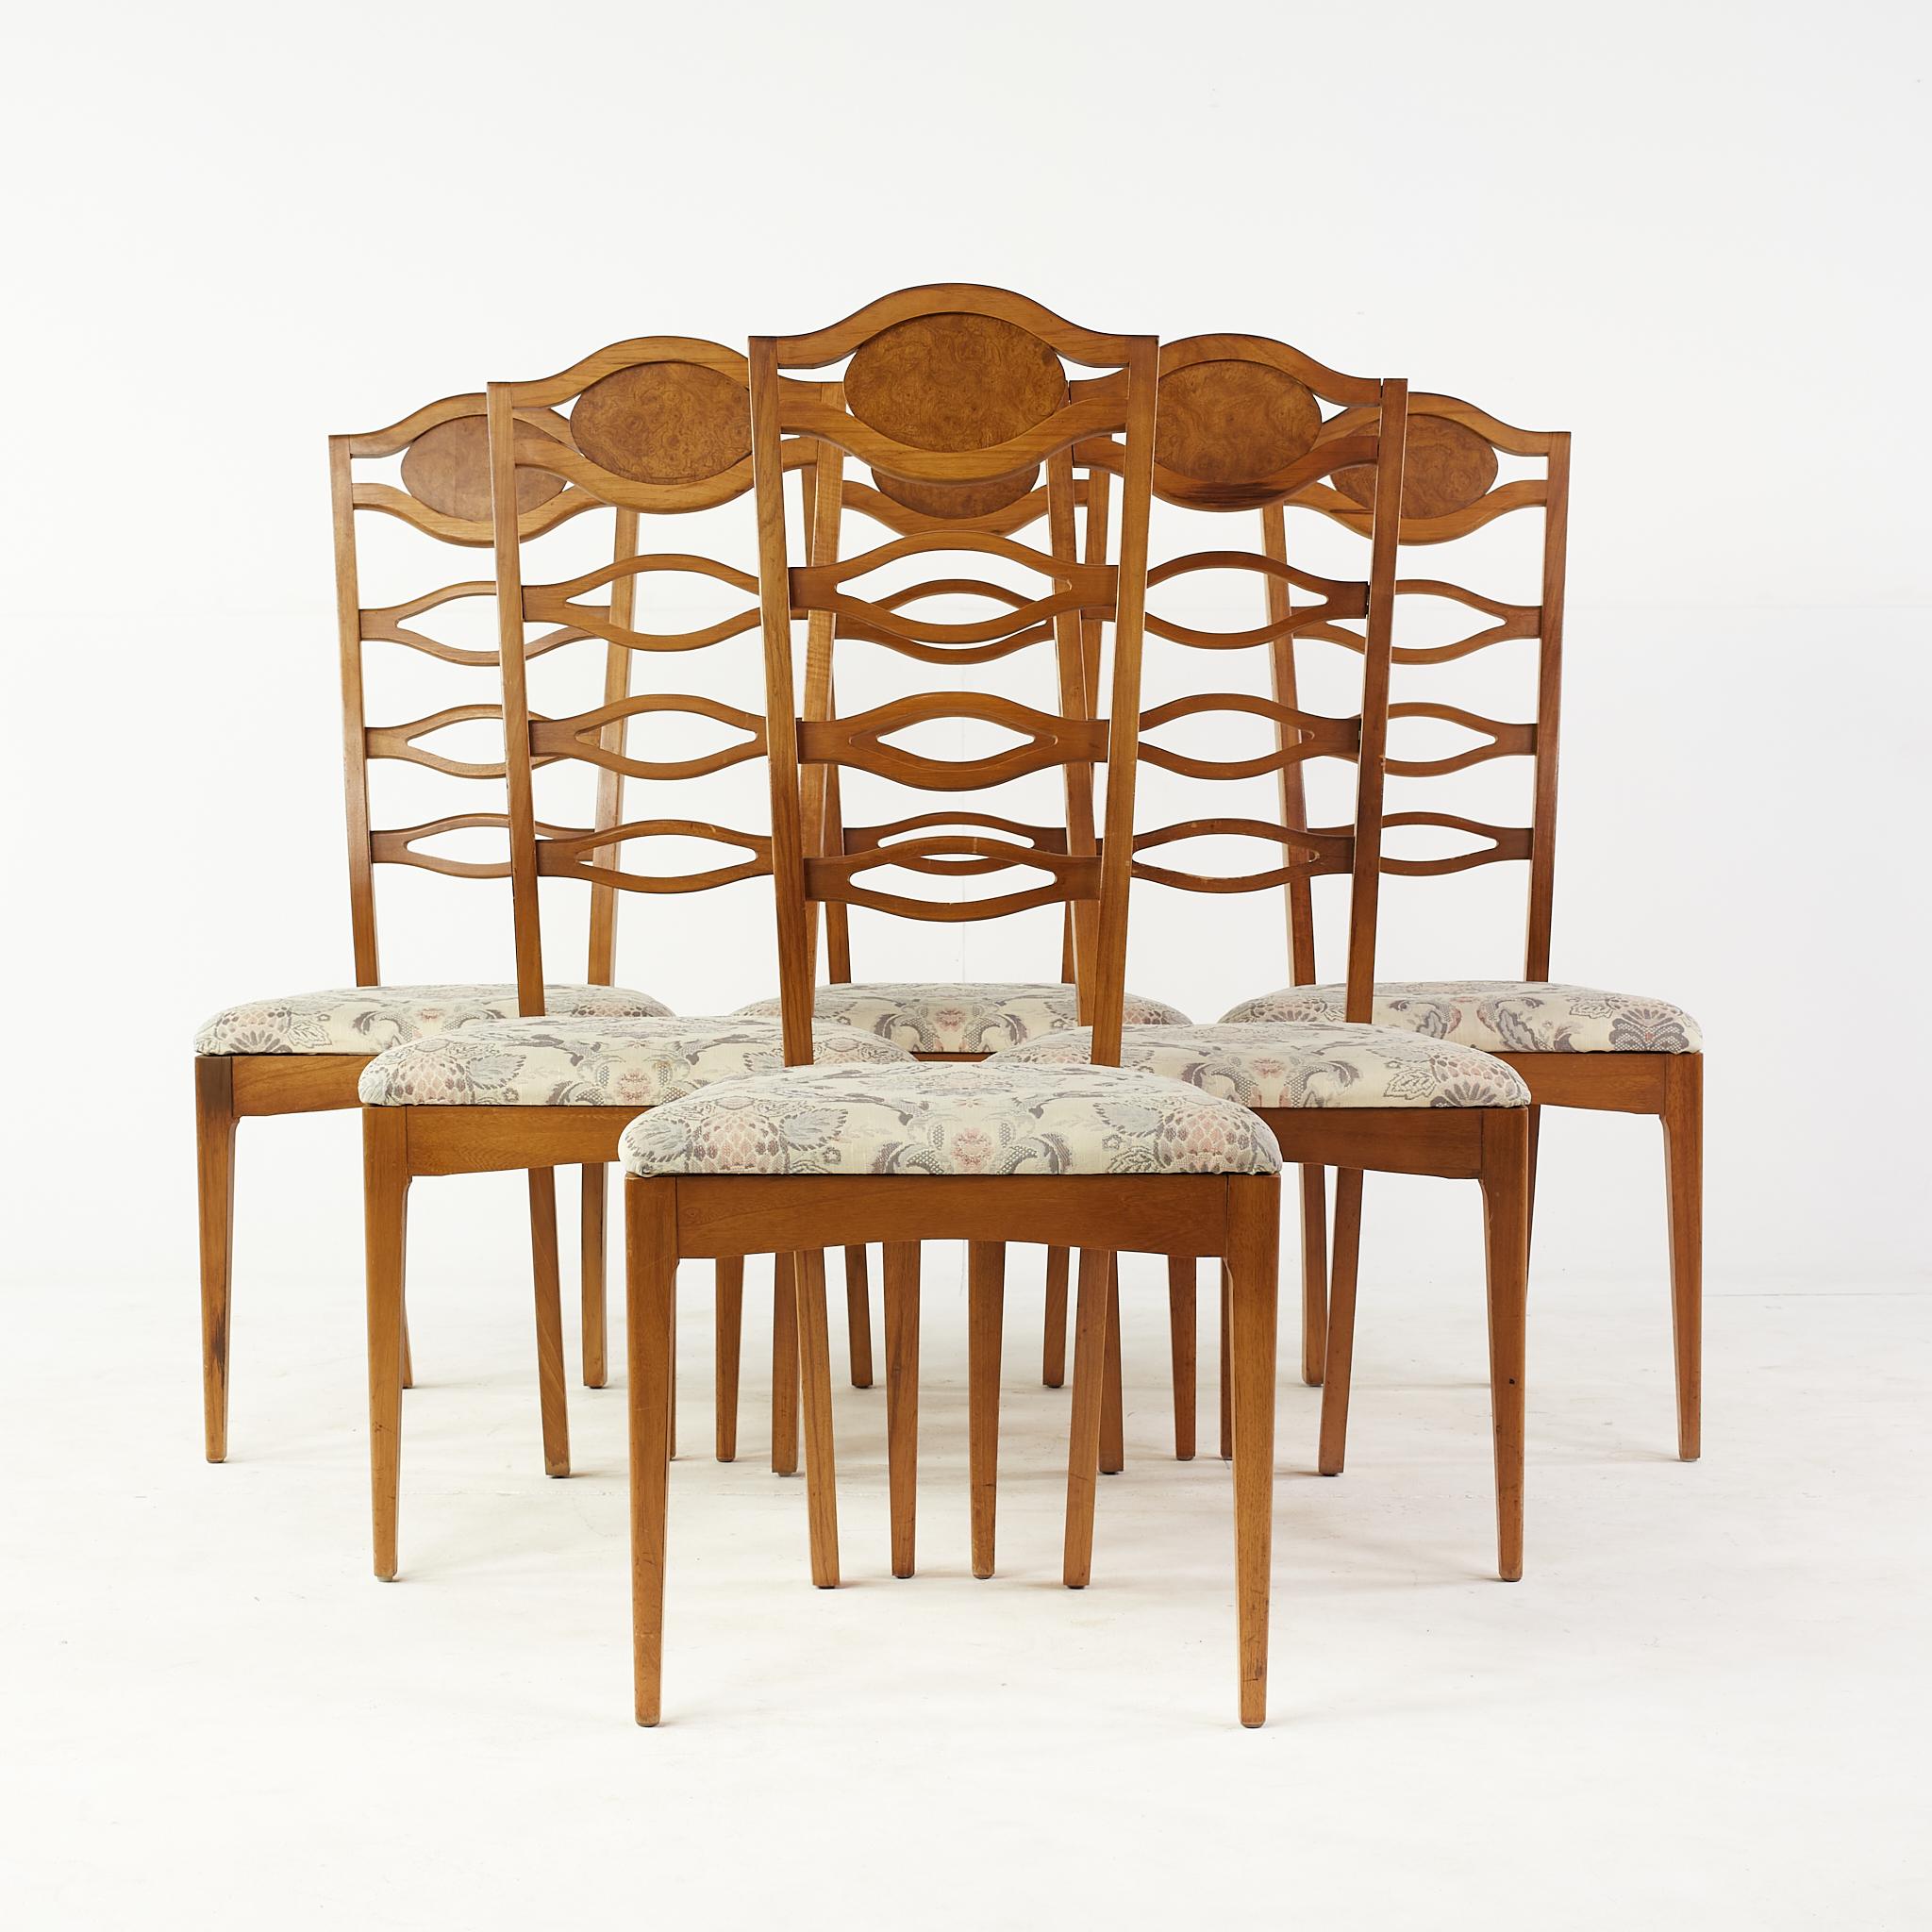 Young Manufacturing mid century walnut and burlwood side dining chairs - set of 6.

These chairs measure: 20.5 wide x 21 deep x 46.25 inches high, with a seat height/chair clearance of 18.5 inches.

All pieces of furniture can be had in what we